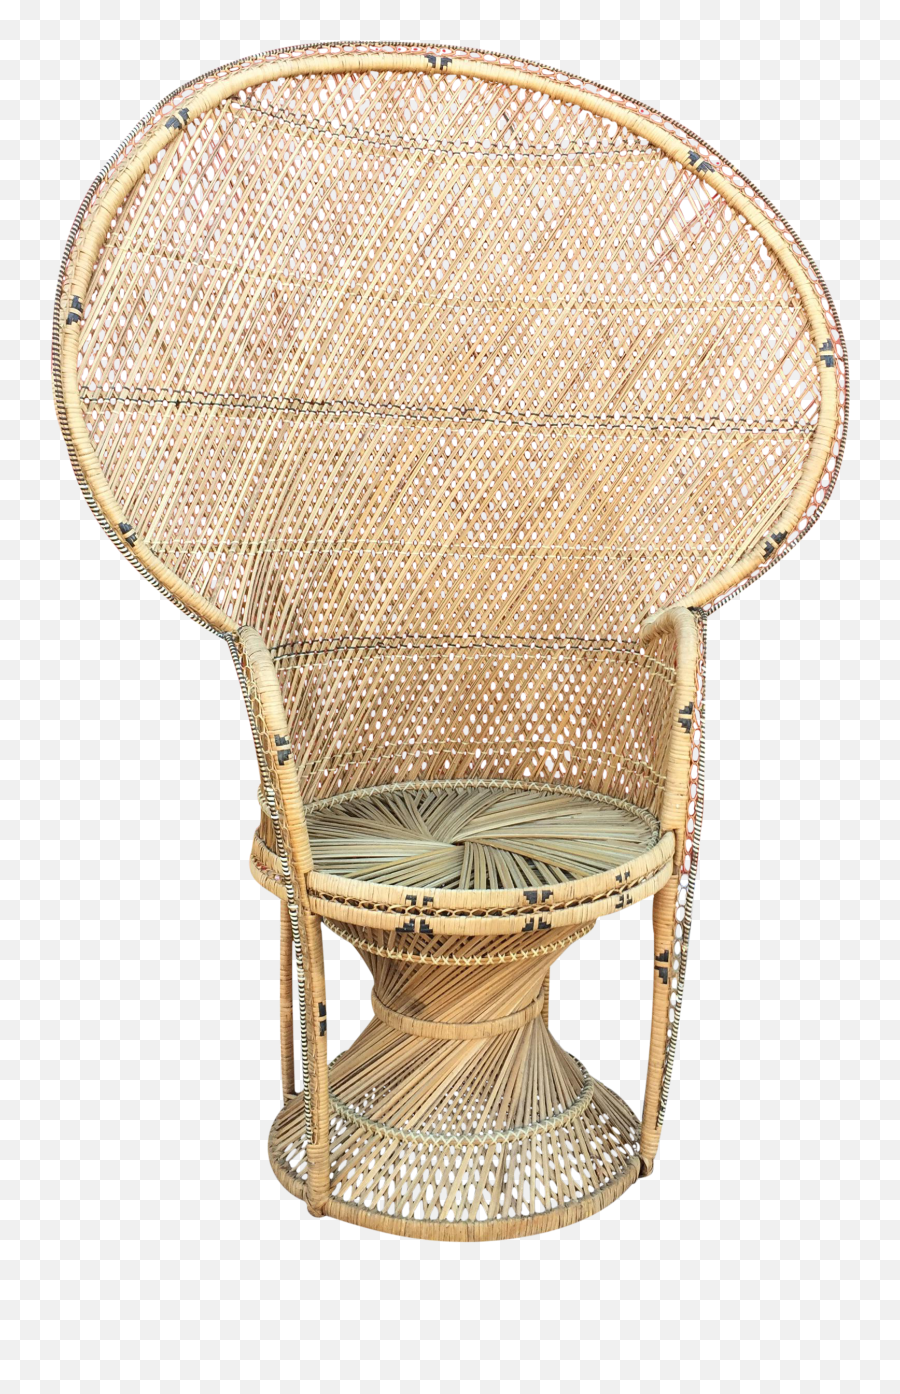 Vintage Peacock Fanback Wicker Throne Chair - Chair Png,Throne Chair Png